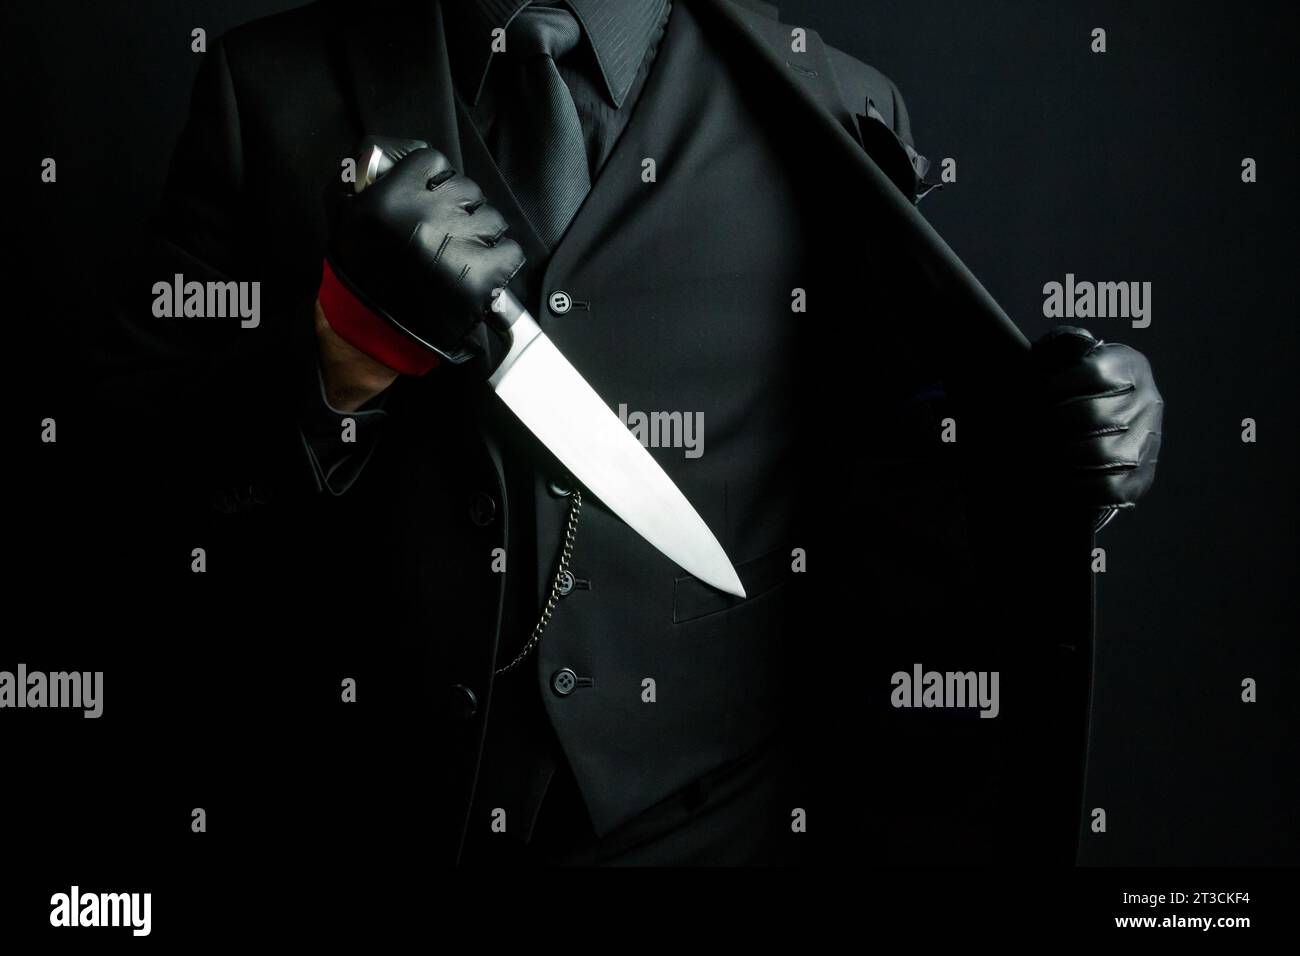 Portrait of Mystery Man in Black Suit Pulling Out Knife From Jacket. Horror Movie Killer Stock Photo